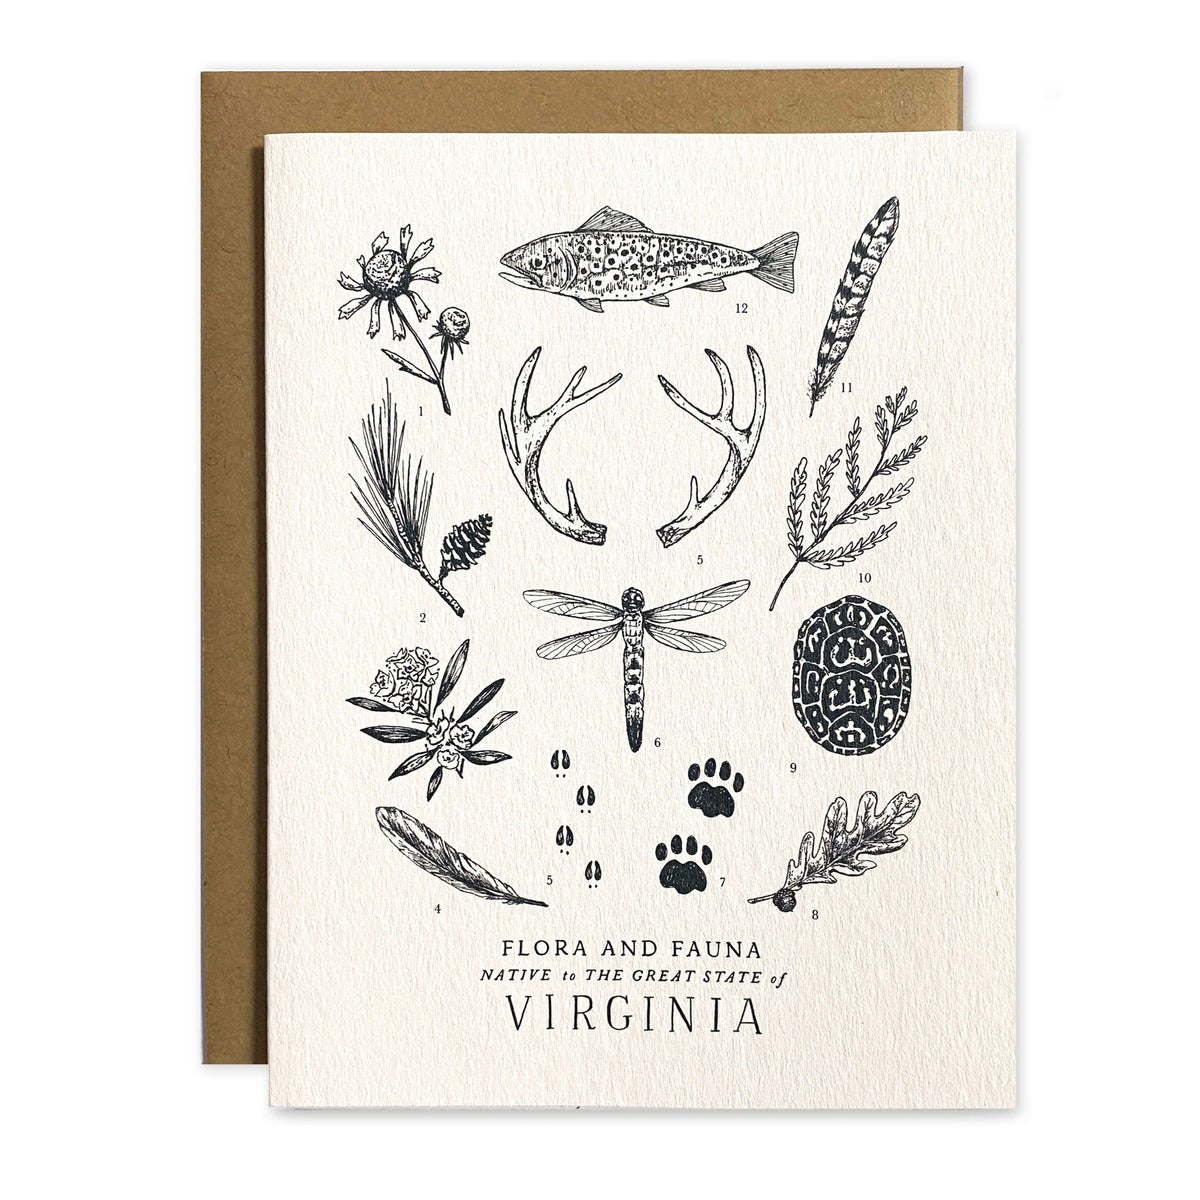 A Virginia Field Guide Greeting Card with a black and white illustration of a deer and frogs by The Wild Wander.